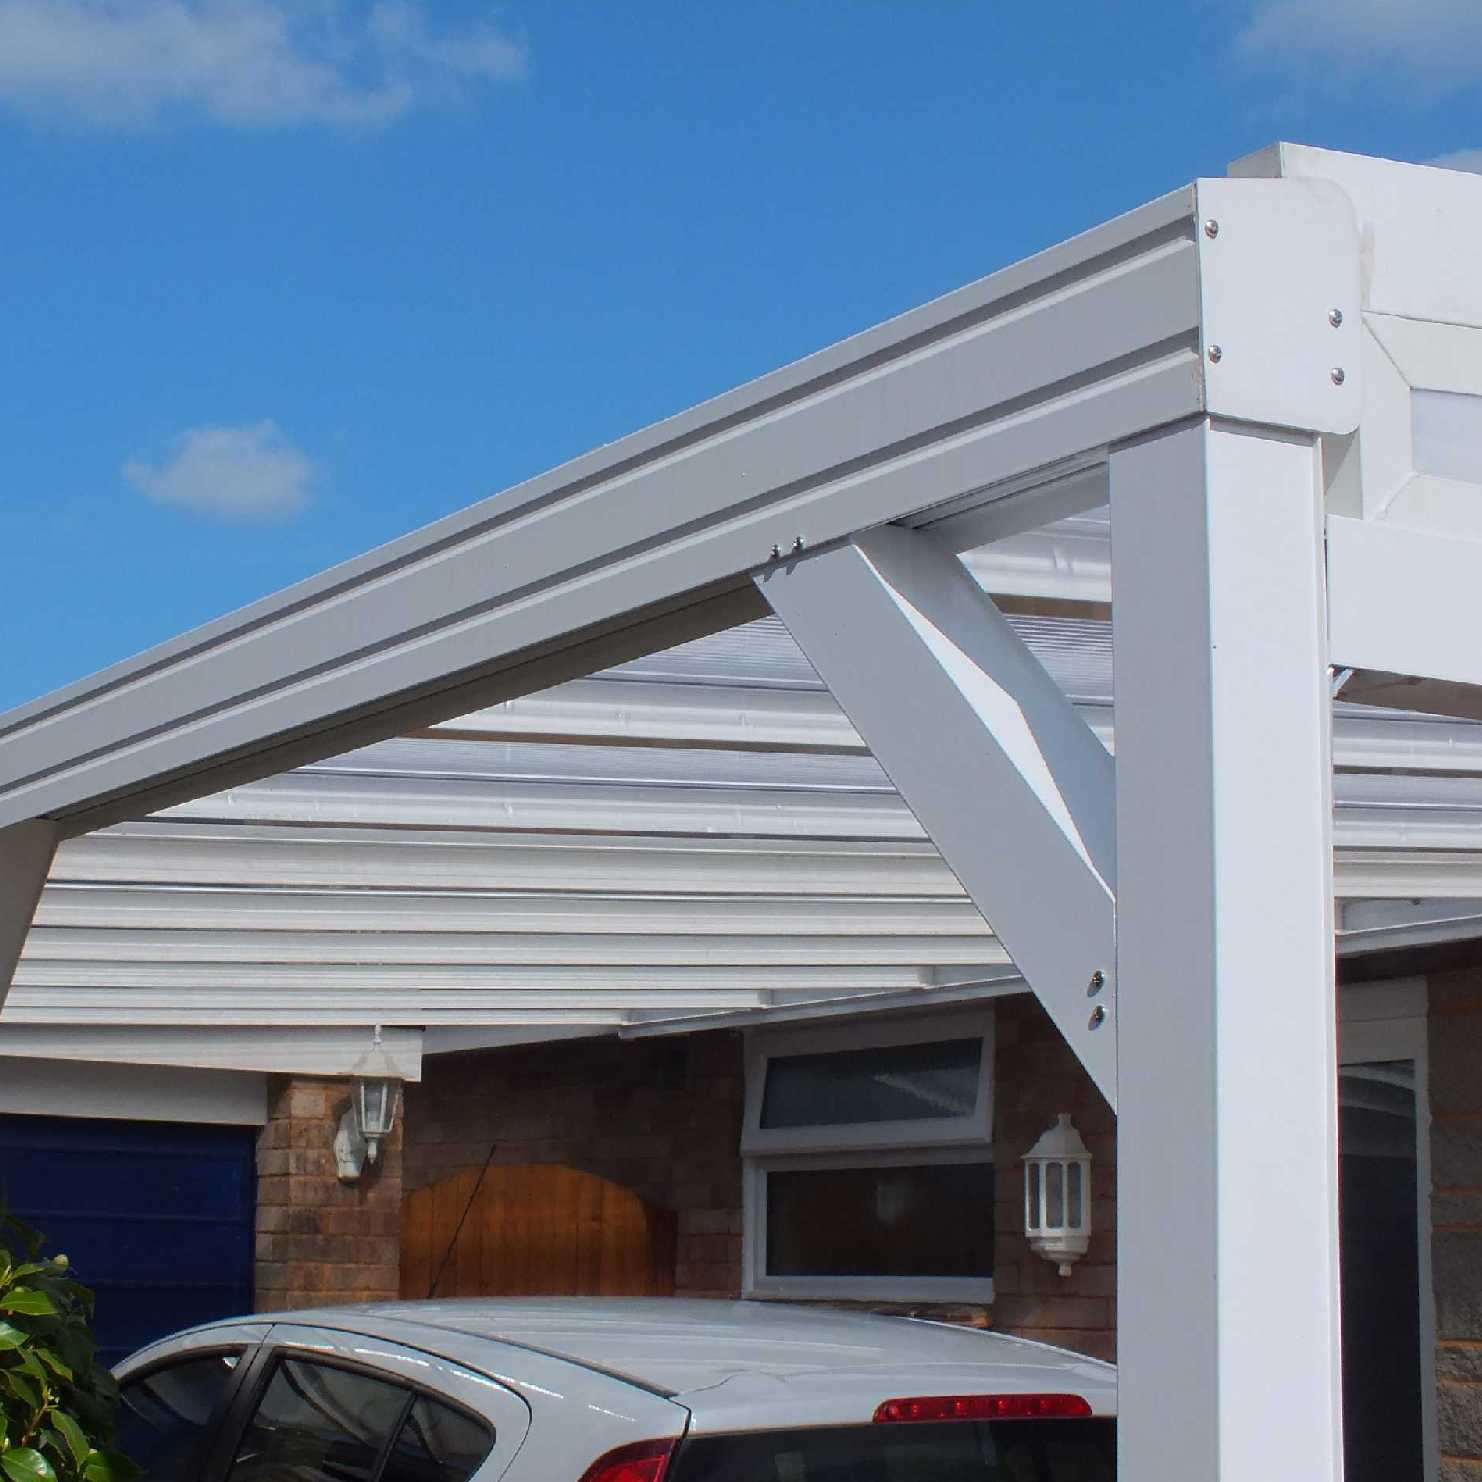 Great deals on Omega Smart Lean-To Canopy, White with 16mm Polycarbonate Glazing - 8.4m (W) x 4.0m (P), (4) Supporting Posts